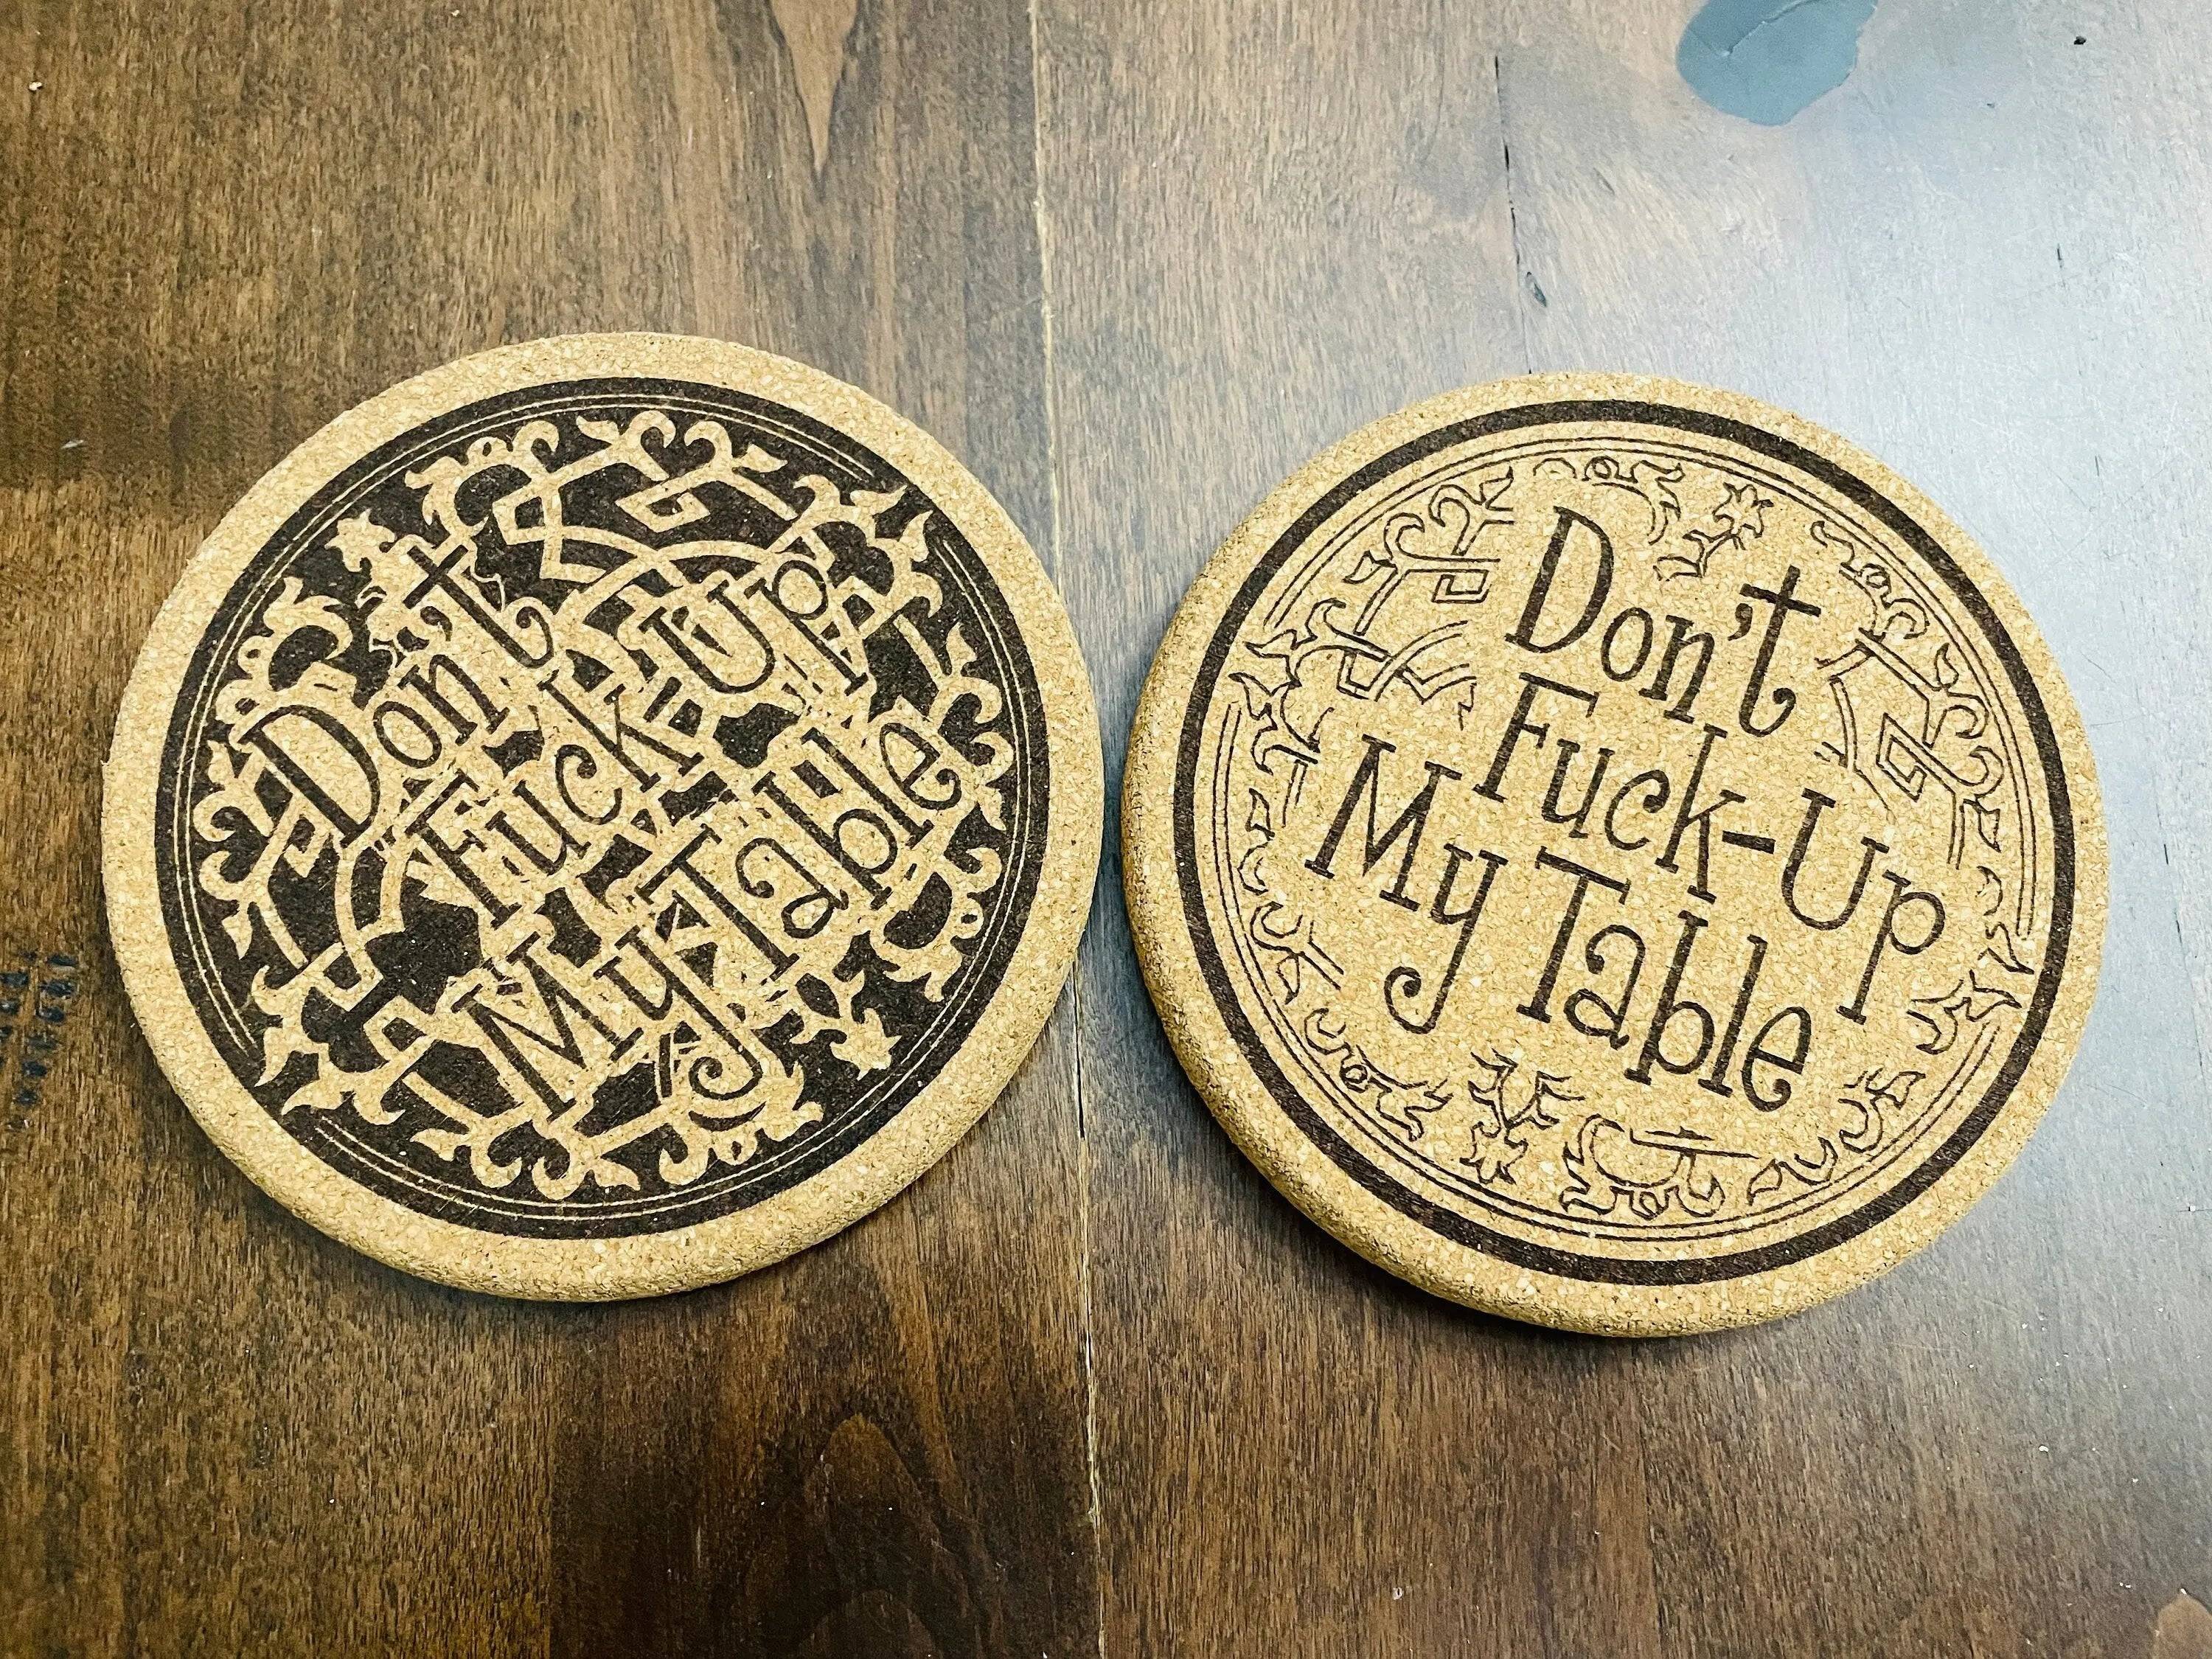 Don’t F-Up My Table cork design coaster set for housewarming, gag gift, friends, drinks, bar decor Thick Tableware engraved